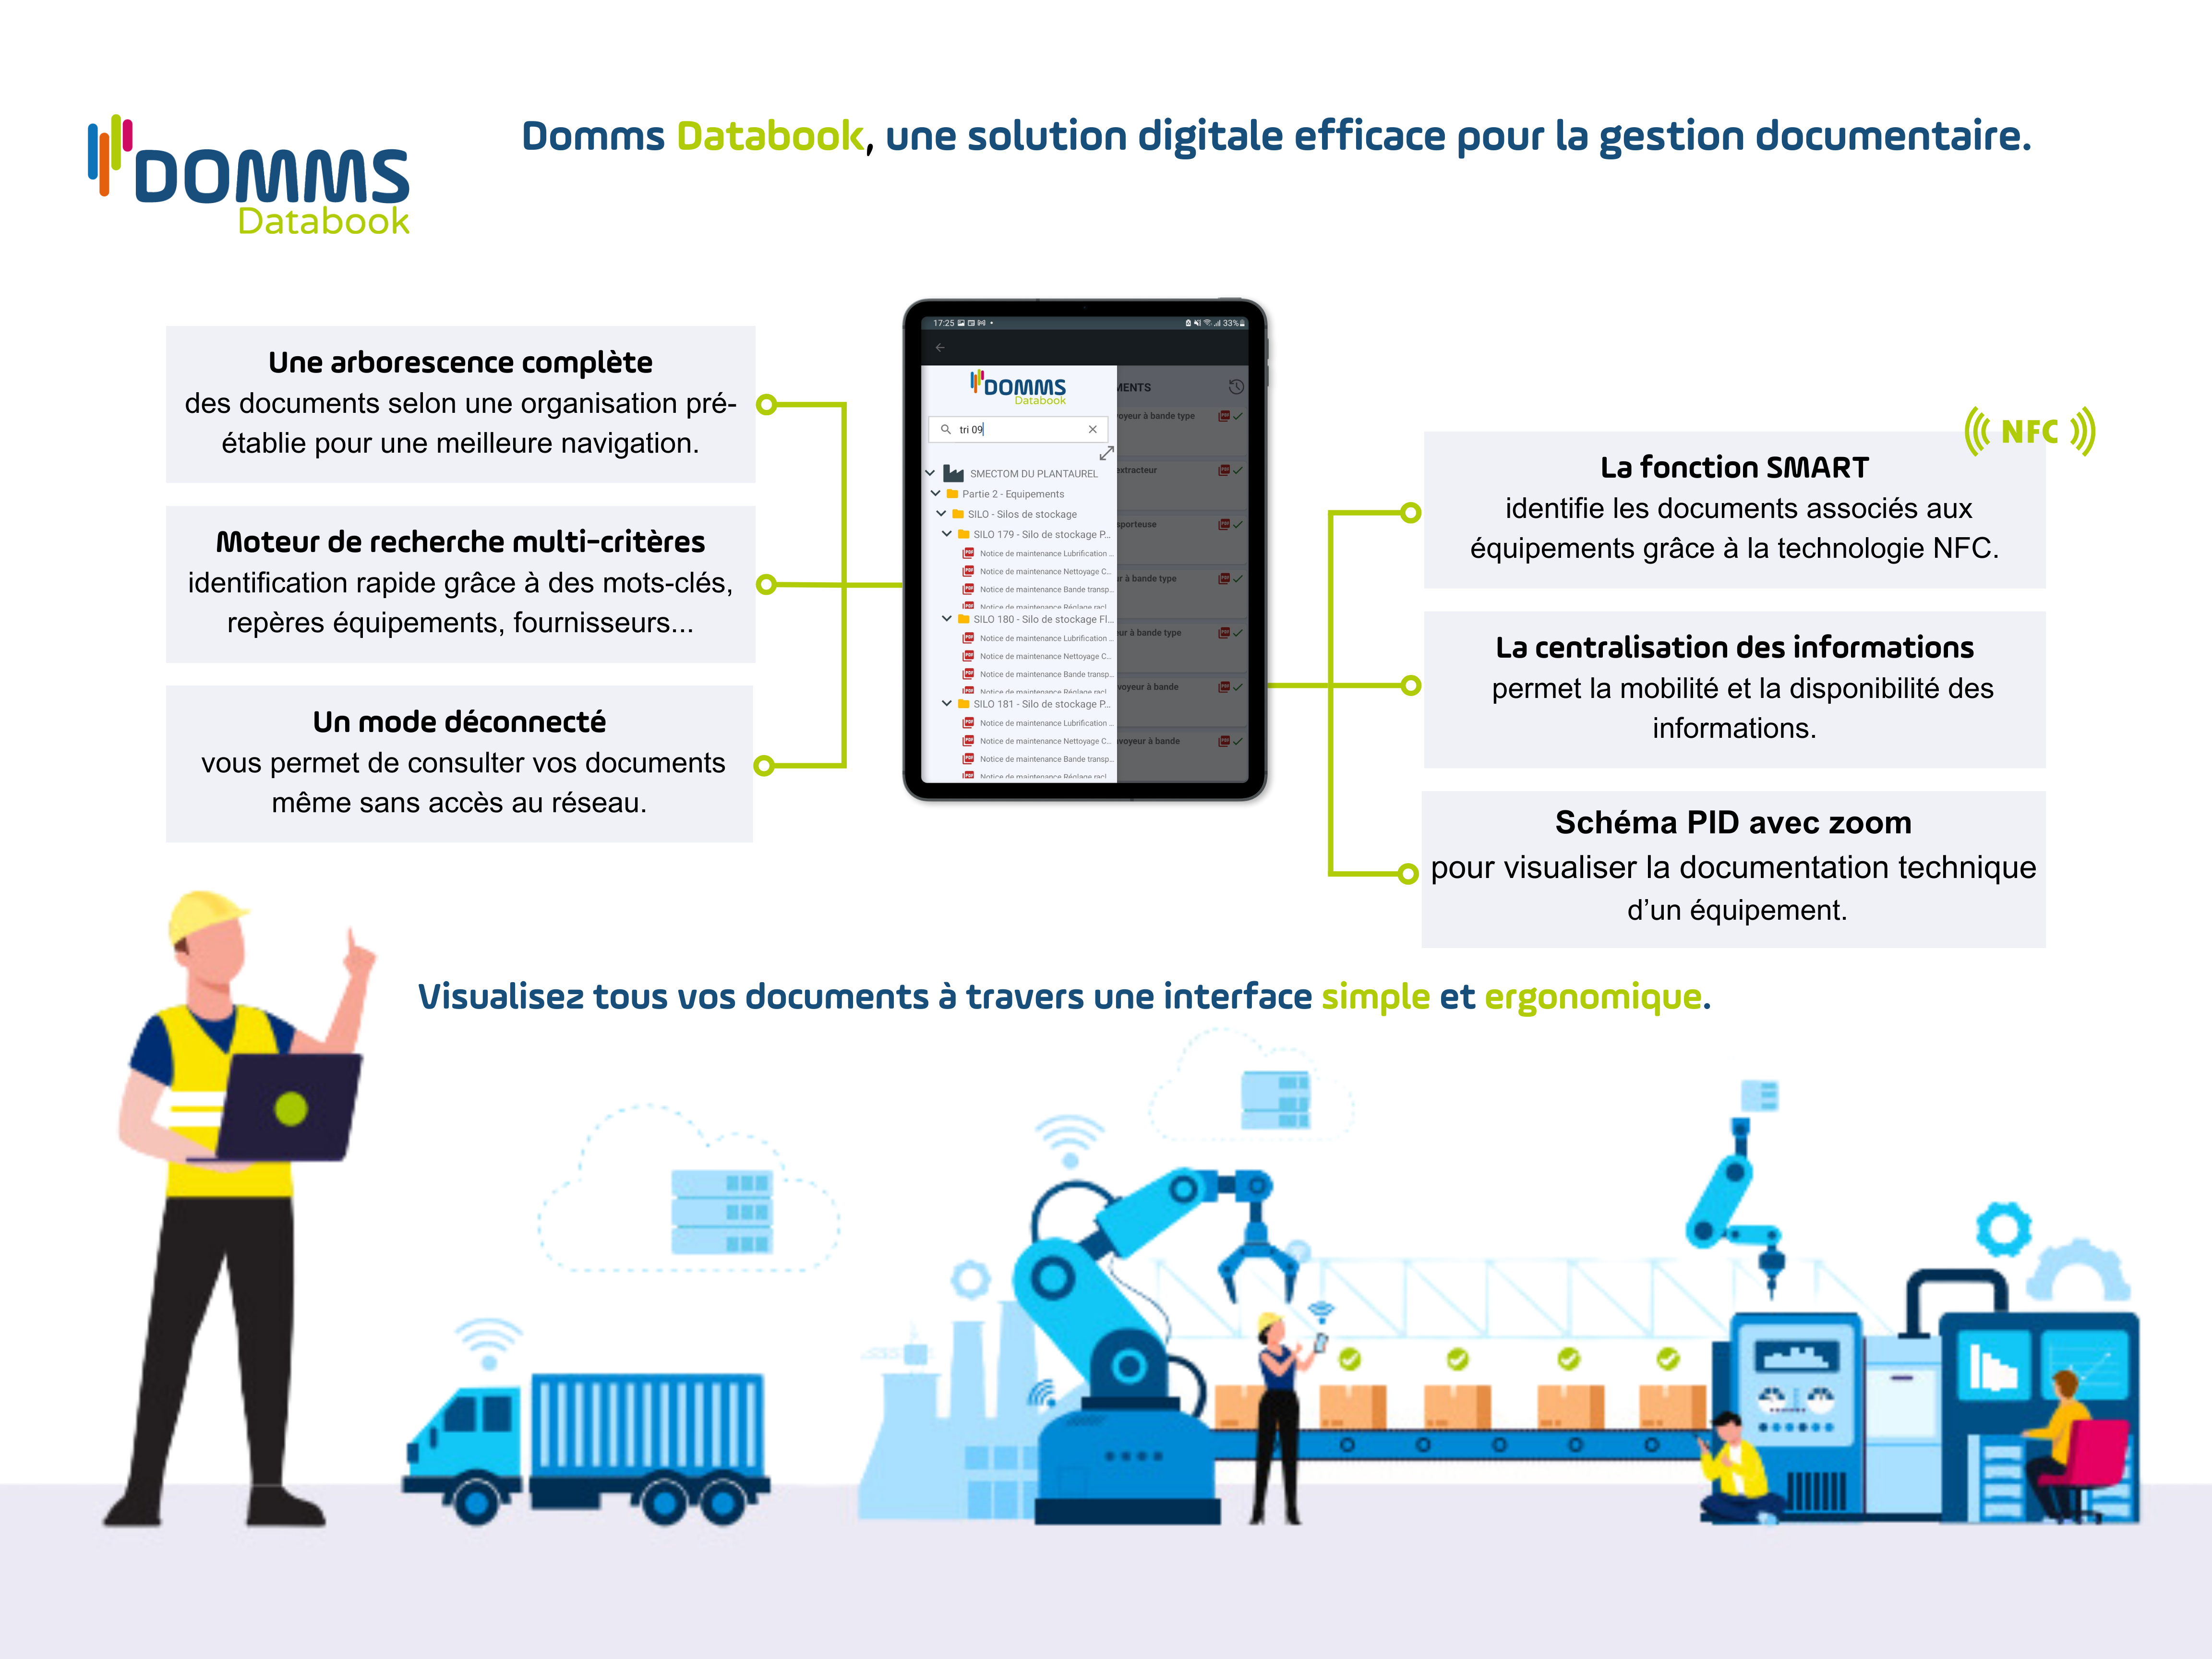 DOMMS Databook, ged gestion documentaire